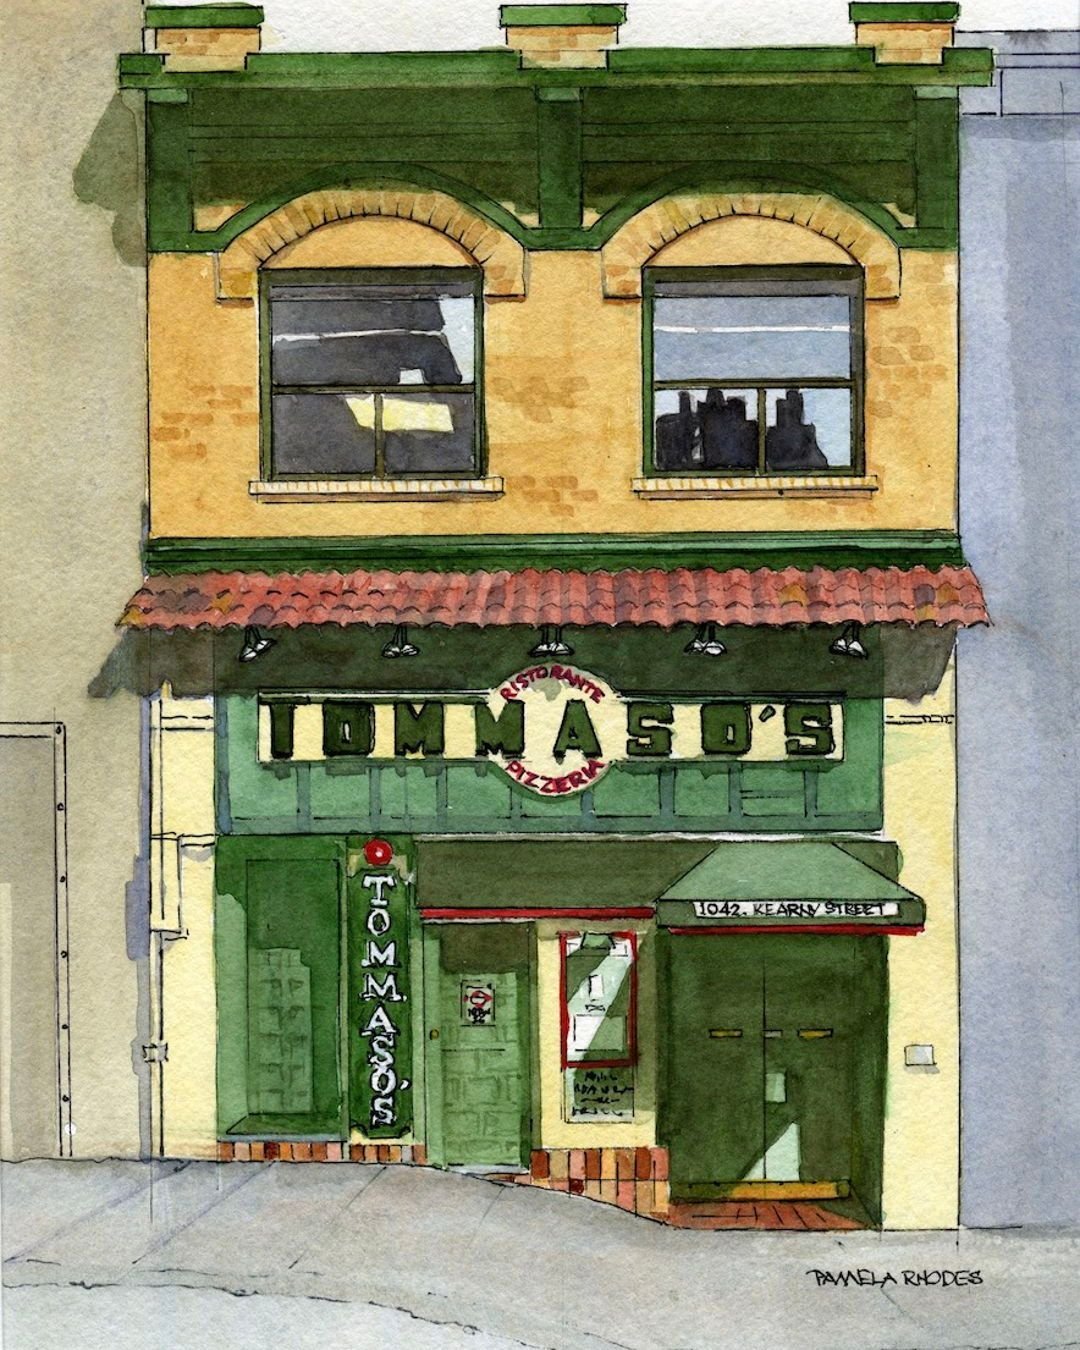 Thomaso's...a North Beach classic. Enjoy a meal there soon and while you're here, enjoy this warm and charming artwork by Pamela Rhodes, our April artist. Hurry in to enjoy this art and others of icons and classics in San Francisco. Show closes this 